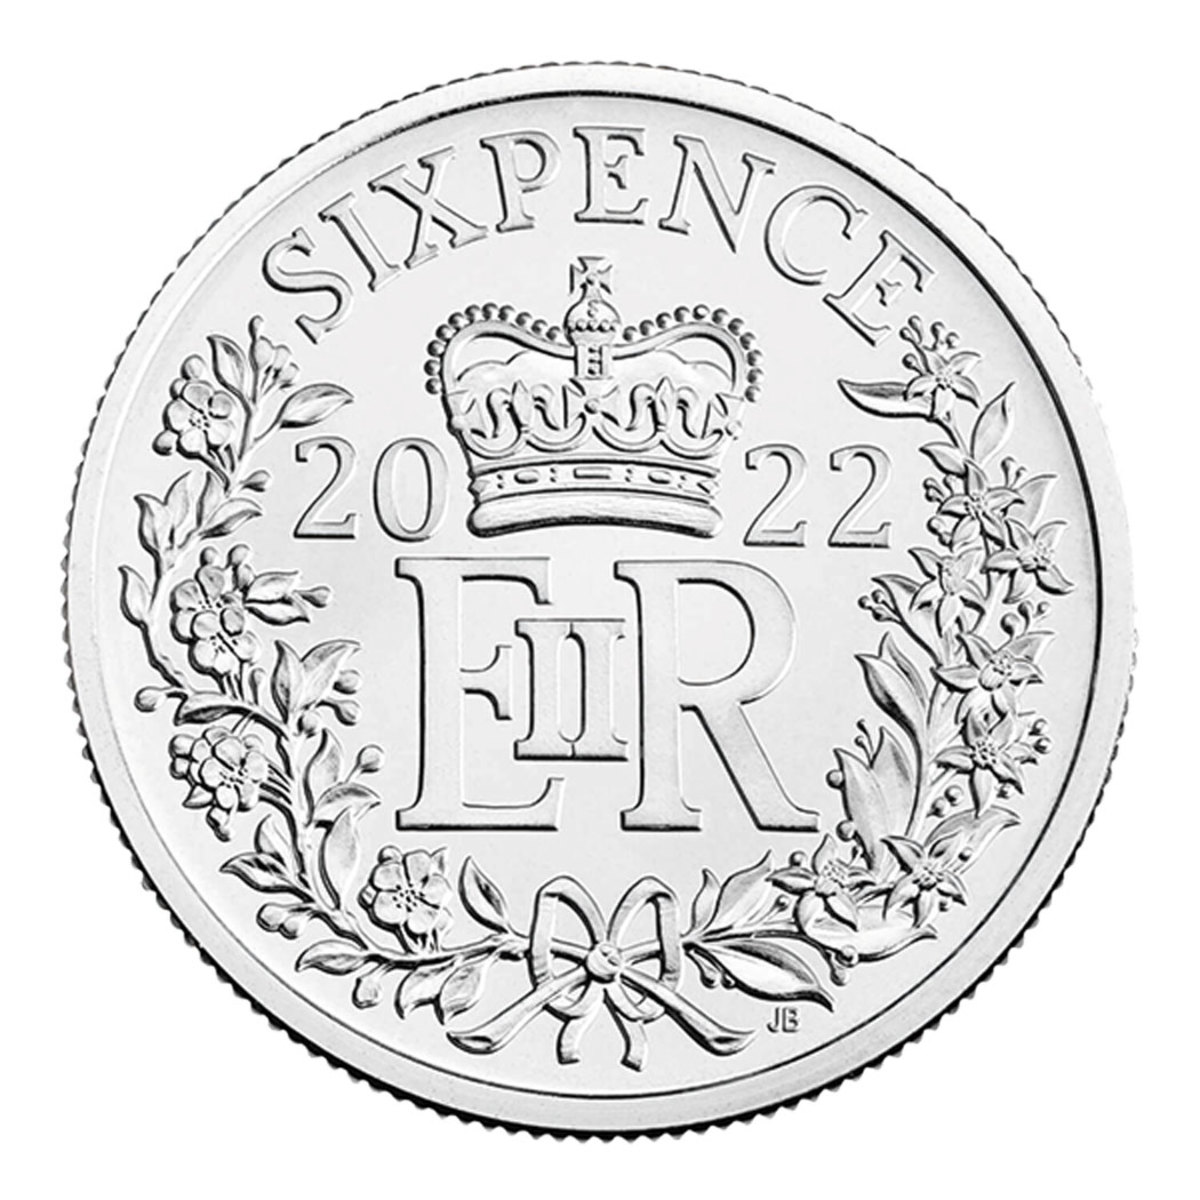 Don’t forget to add a sixpence to your Christmas pudding to invite good fortune for the coming year! (Image courtesy The Royal Mint.) 